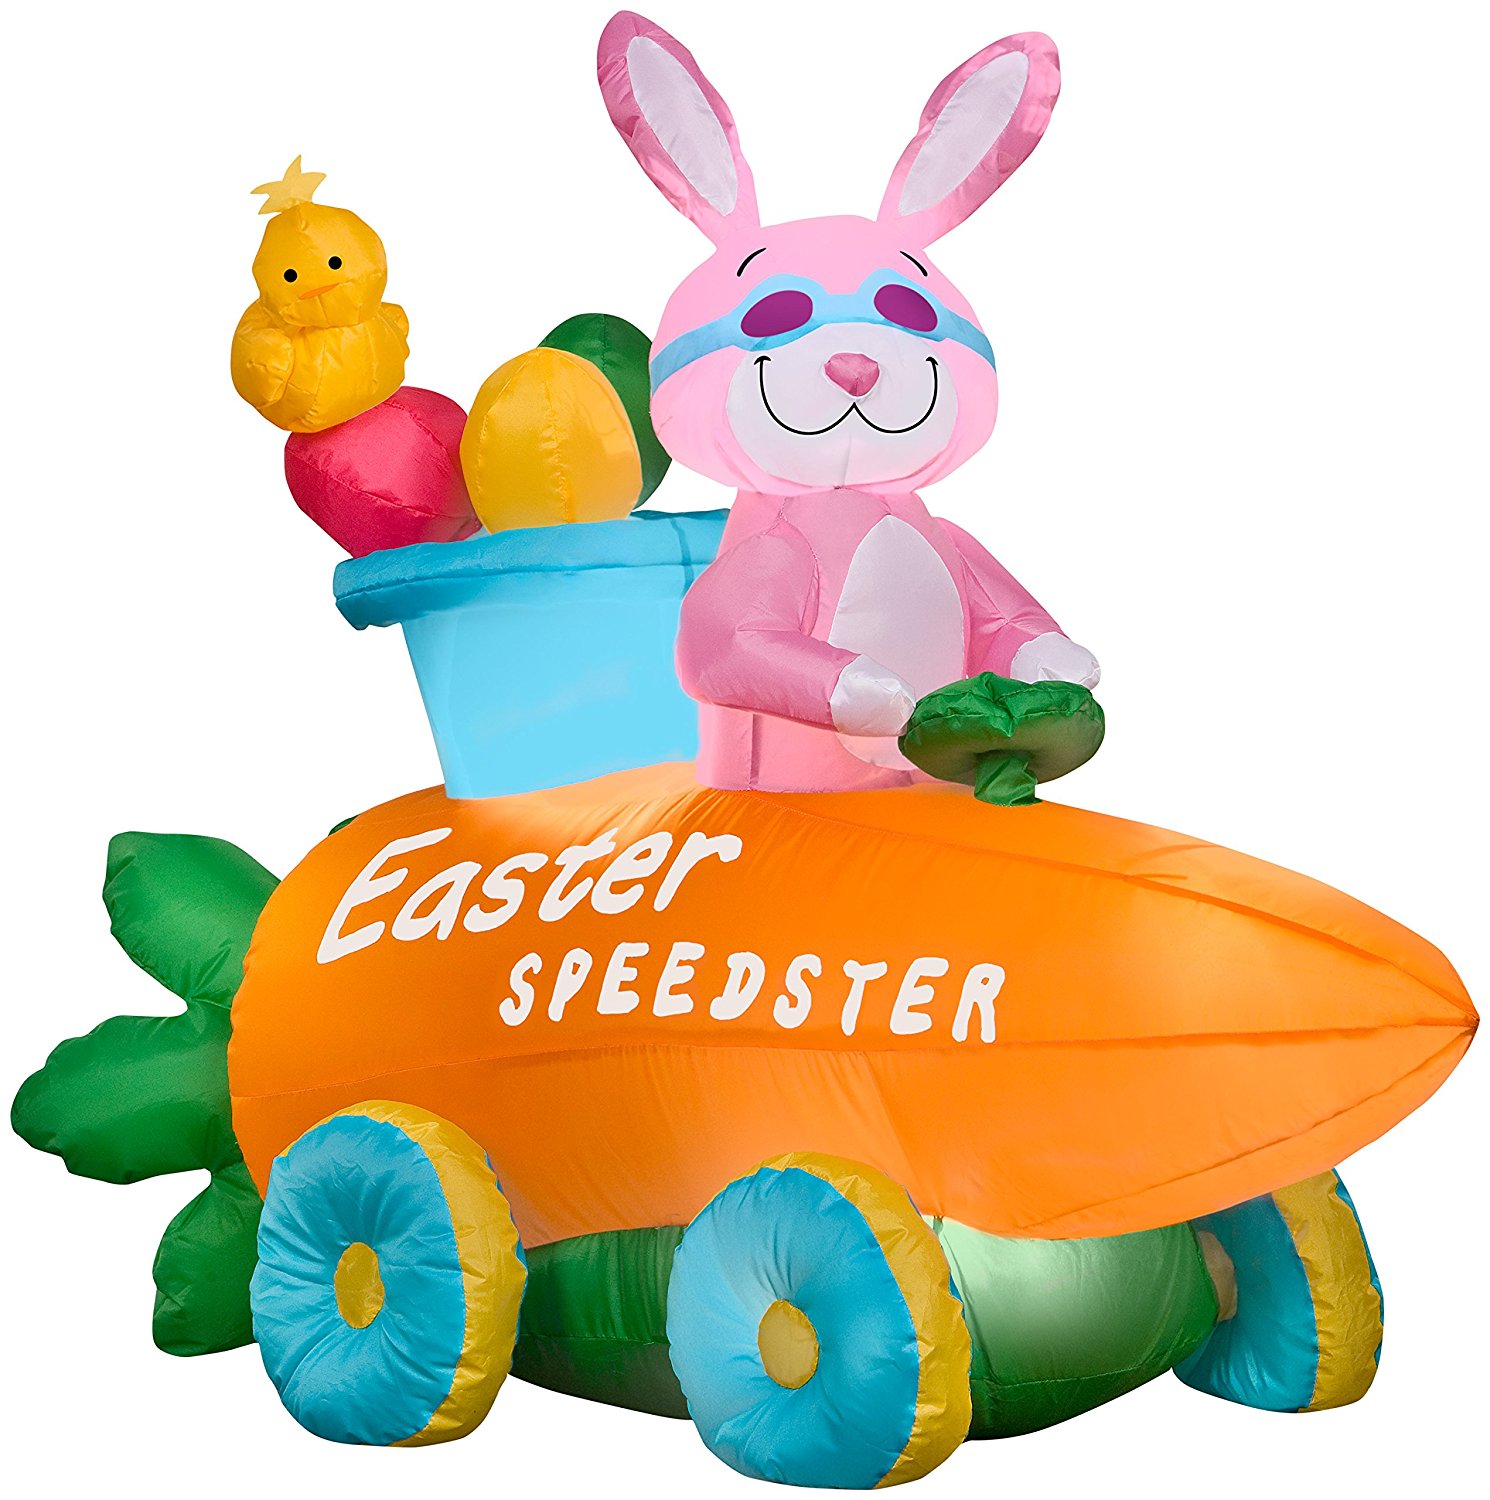 Amazon.com: Gemmy Airblown Inflatable Easter Bunny in Speedster ...